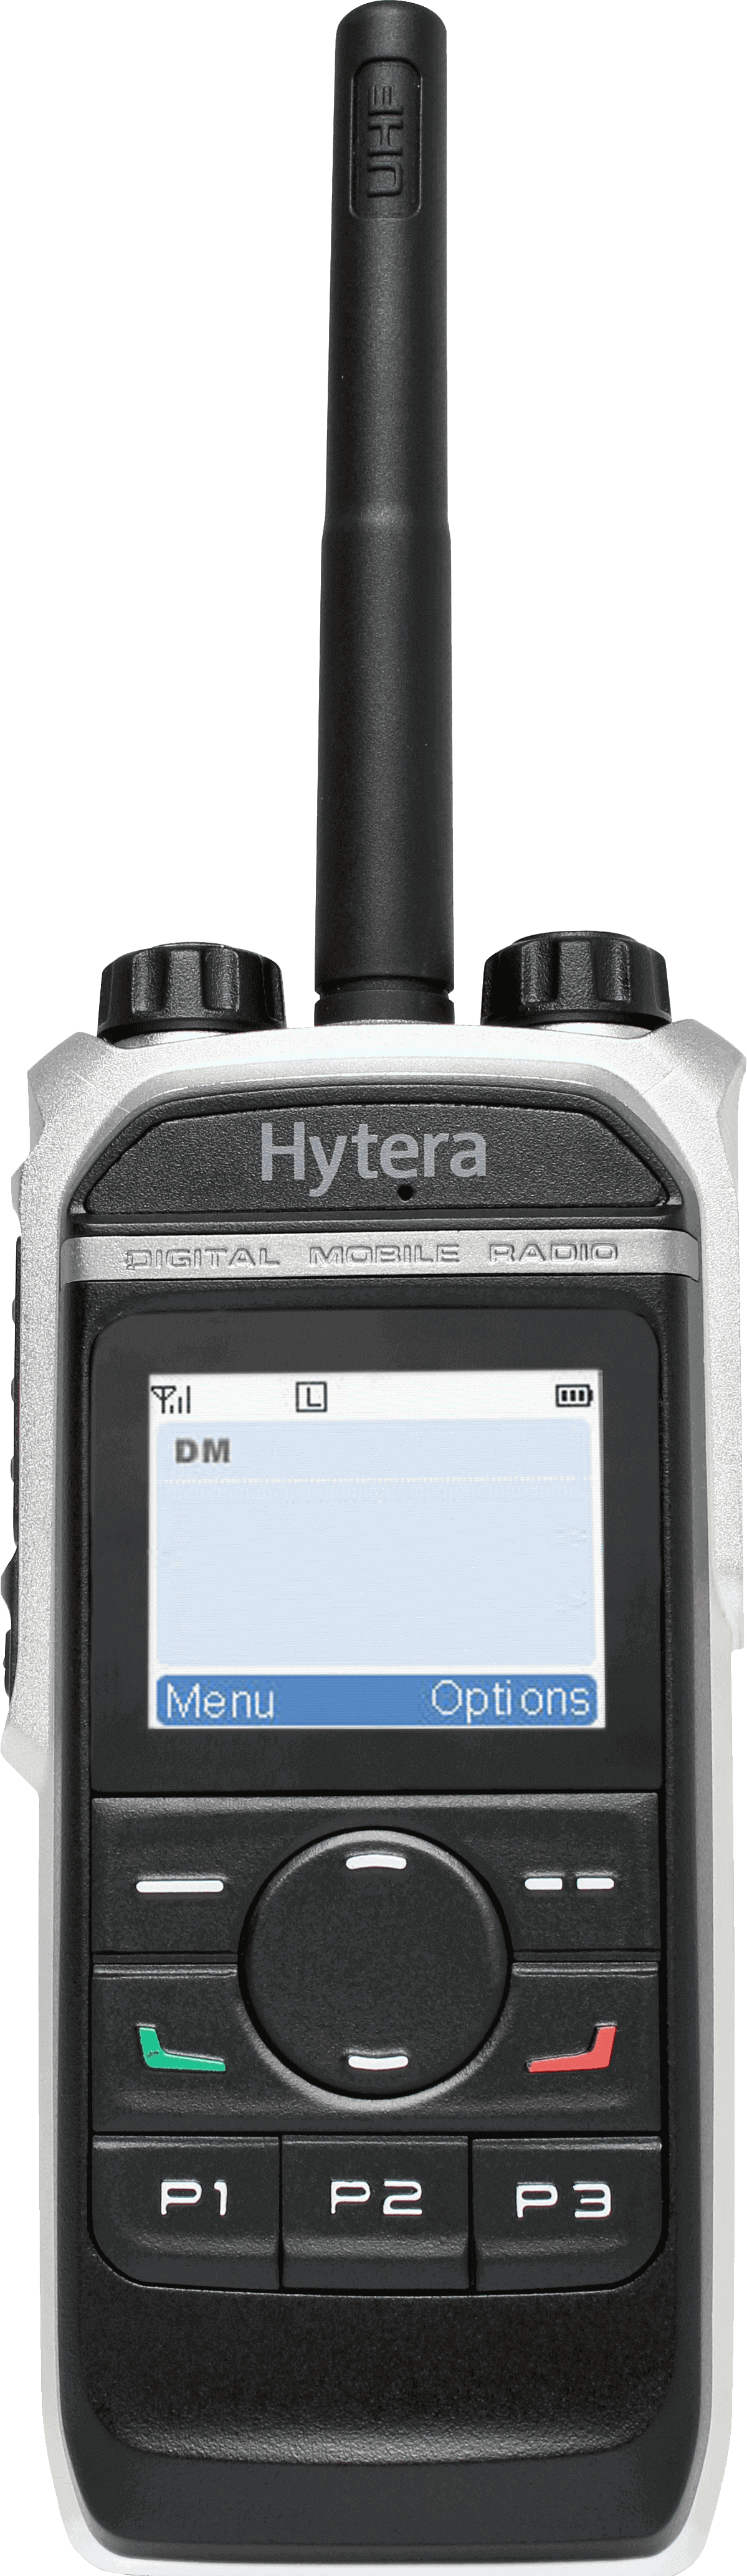 Hytera PD665 featured image